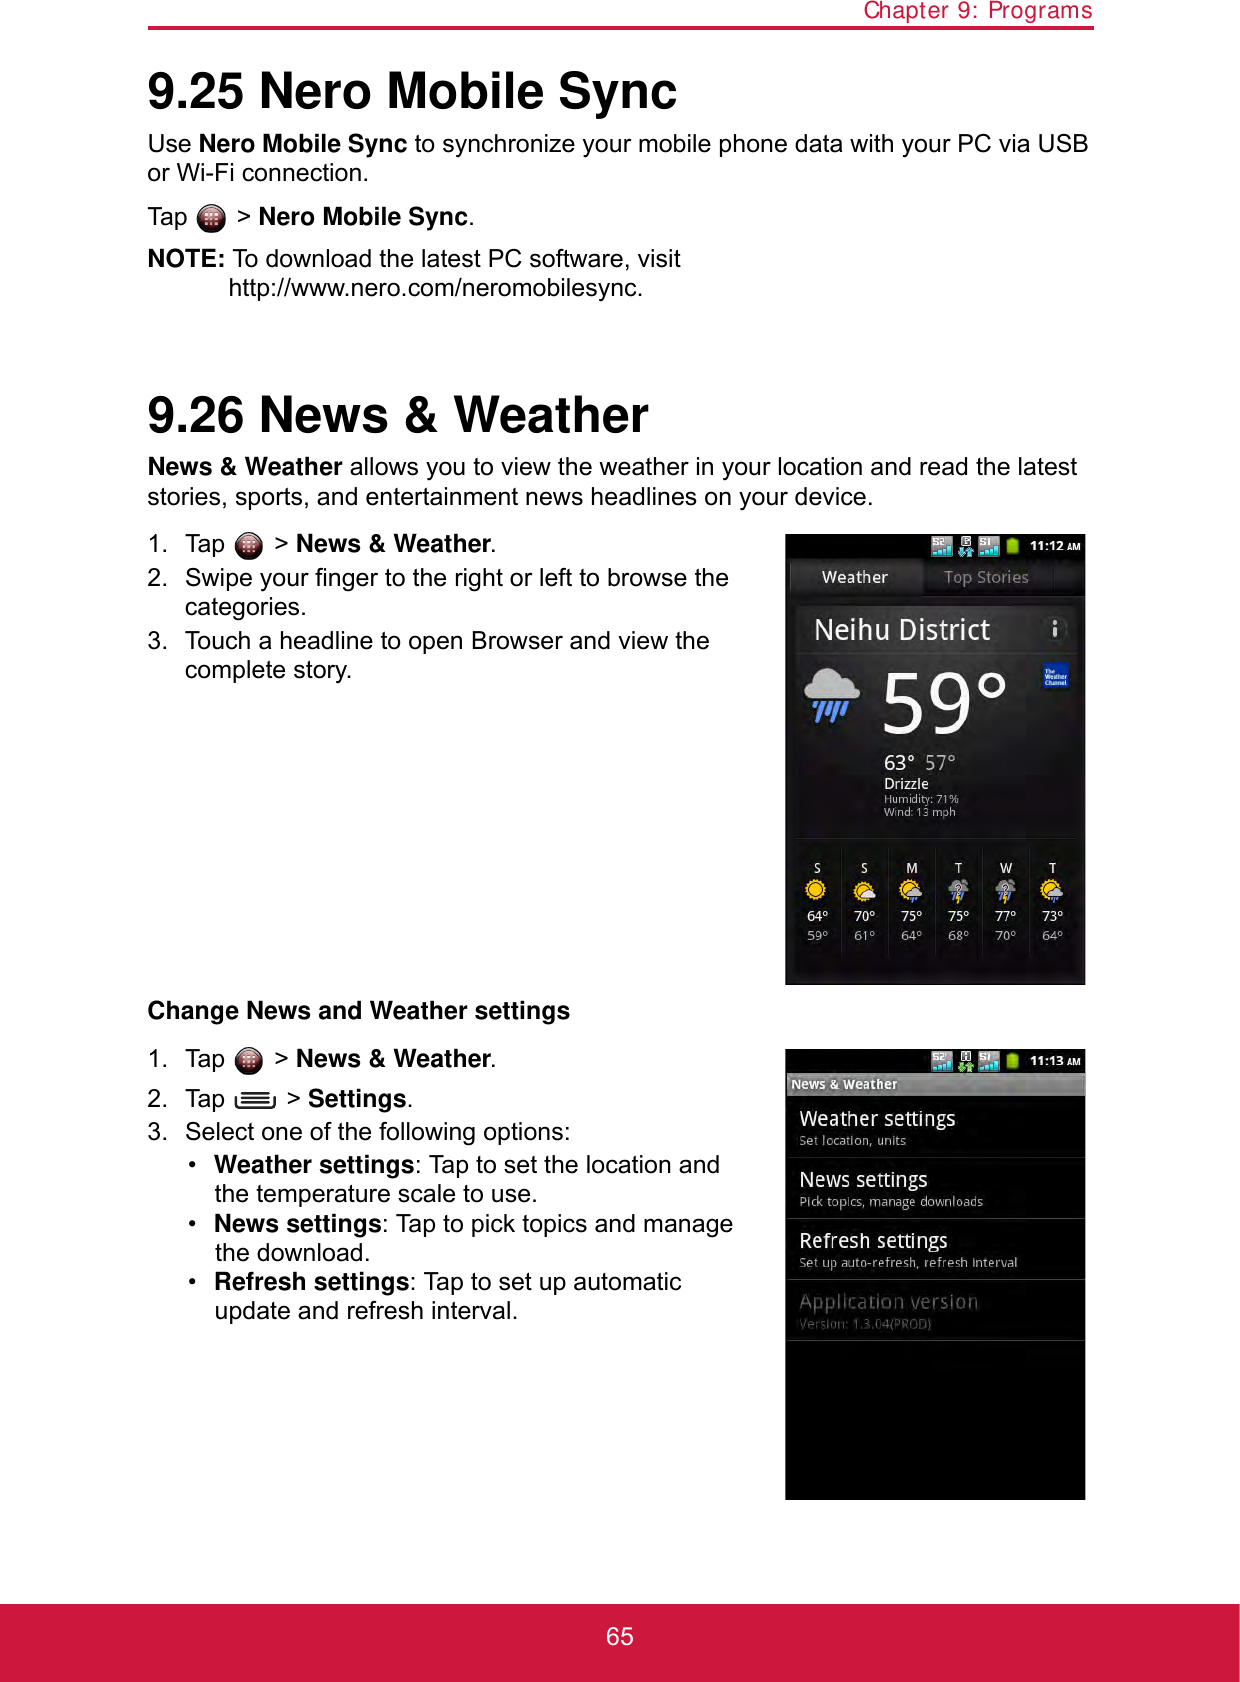 Chapter 9: Programs659.25 Nero Mobile SyncUse Nero Mobile Sync to synchronize your mobile phone data with your PC via USB or Wi-Fi connection. Tap  &gt; Nero Mobile Sync.NOTE: To download the latest PC software, visithttp://www.nero.com/neromobilesync.9.26 News &amp; WeatherNews &amp; Weather allows you to view the weather in your location and read the latest stories, sports, and entertainment news headlines on your device.1. Tap  &gt; News &amp; Weather. 2. Swipe your finger to the right or left to browse the categories.3. Touch a headline to open Browser and view the complete story.Change News and Weather settings1. Tap  &gt; News &amp; Weather. 2. Tap  &gt; Settings.3. Select one of the following options:•Weather settings: Tap to set the location and the temperature scale to use.•News settings: Tap to pick topics and manage the download.•Refresh settings: Tap to set up automatic update and refresh interval.